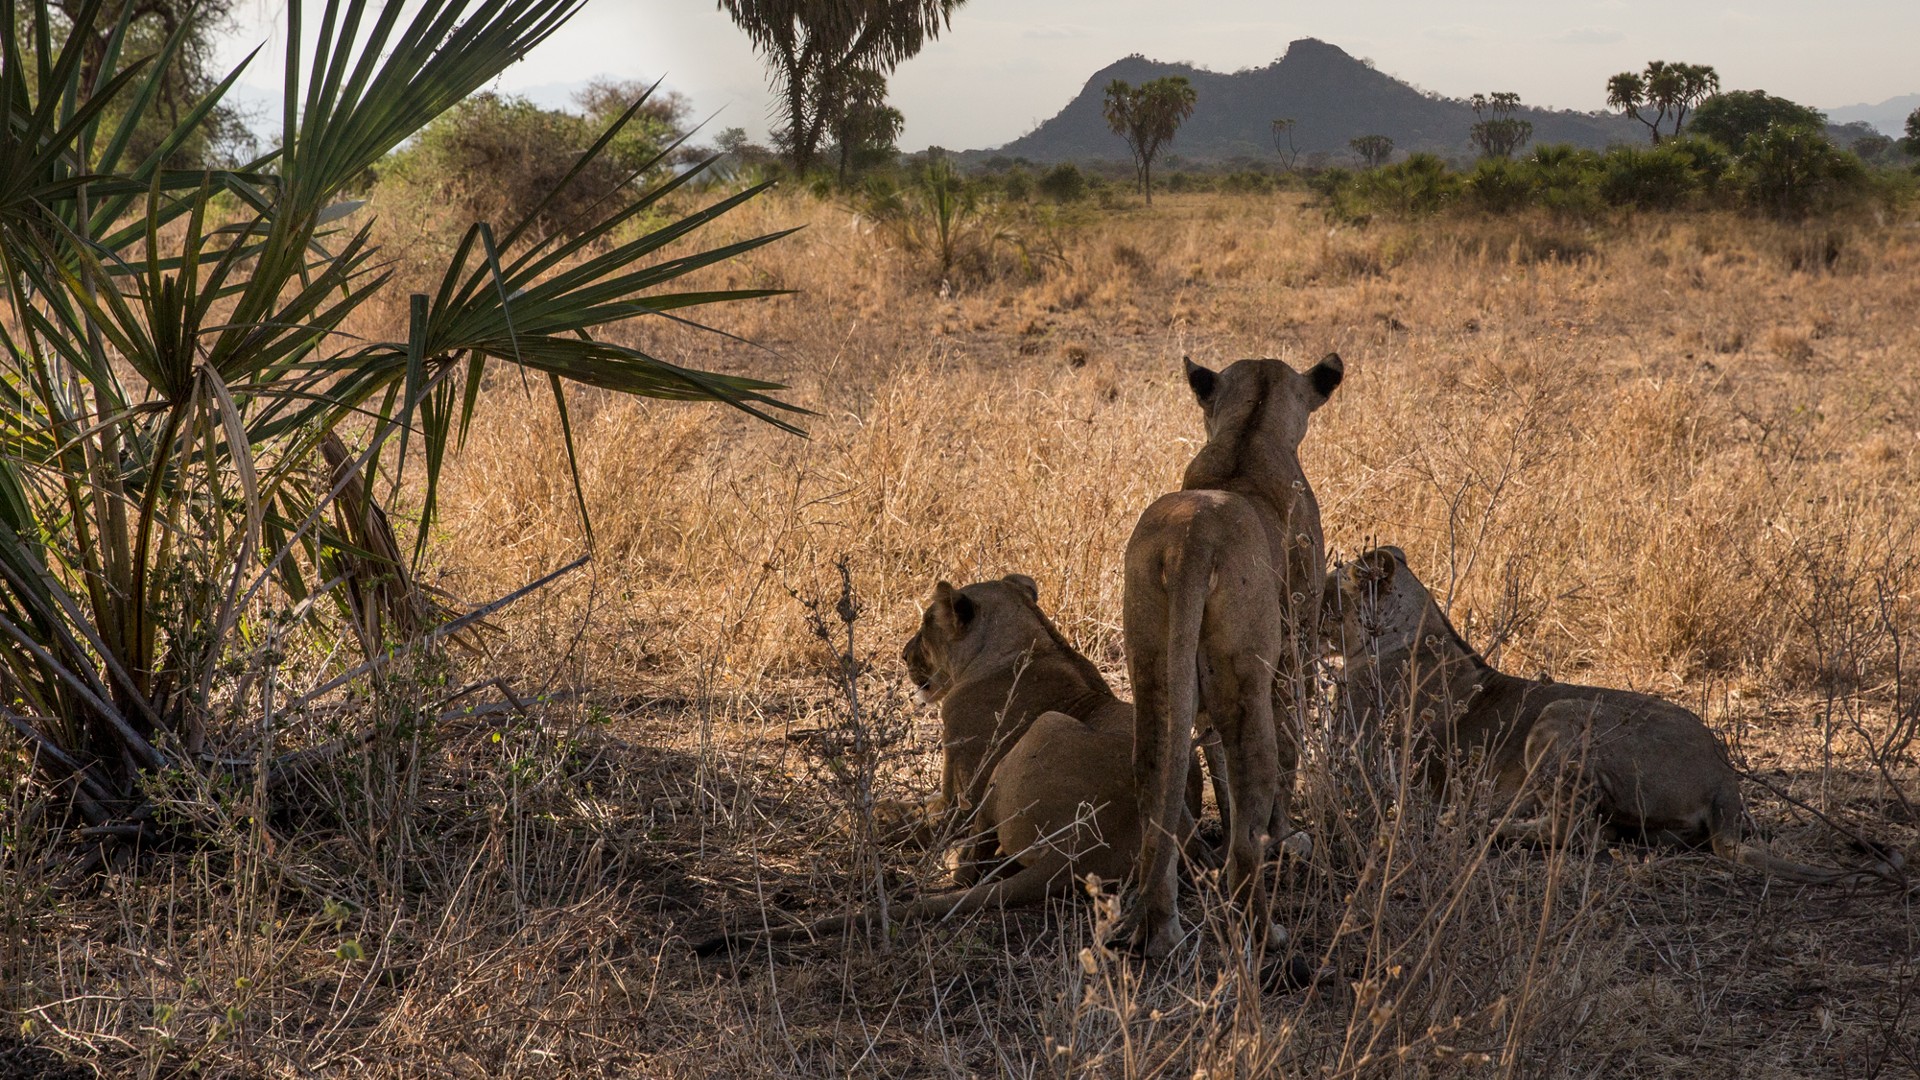 Three lionesses looking out over the savannah whilst standing together under some shady trees